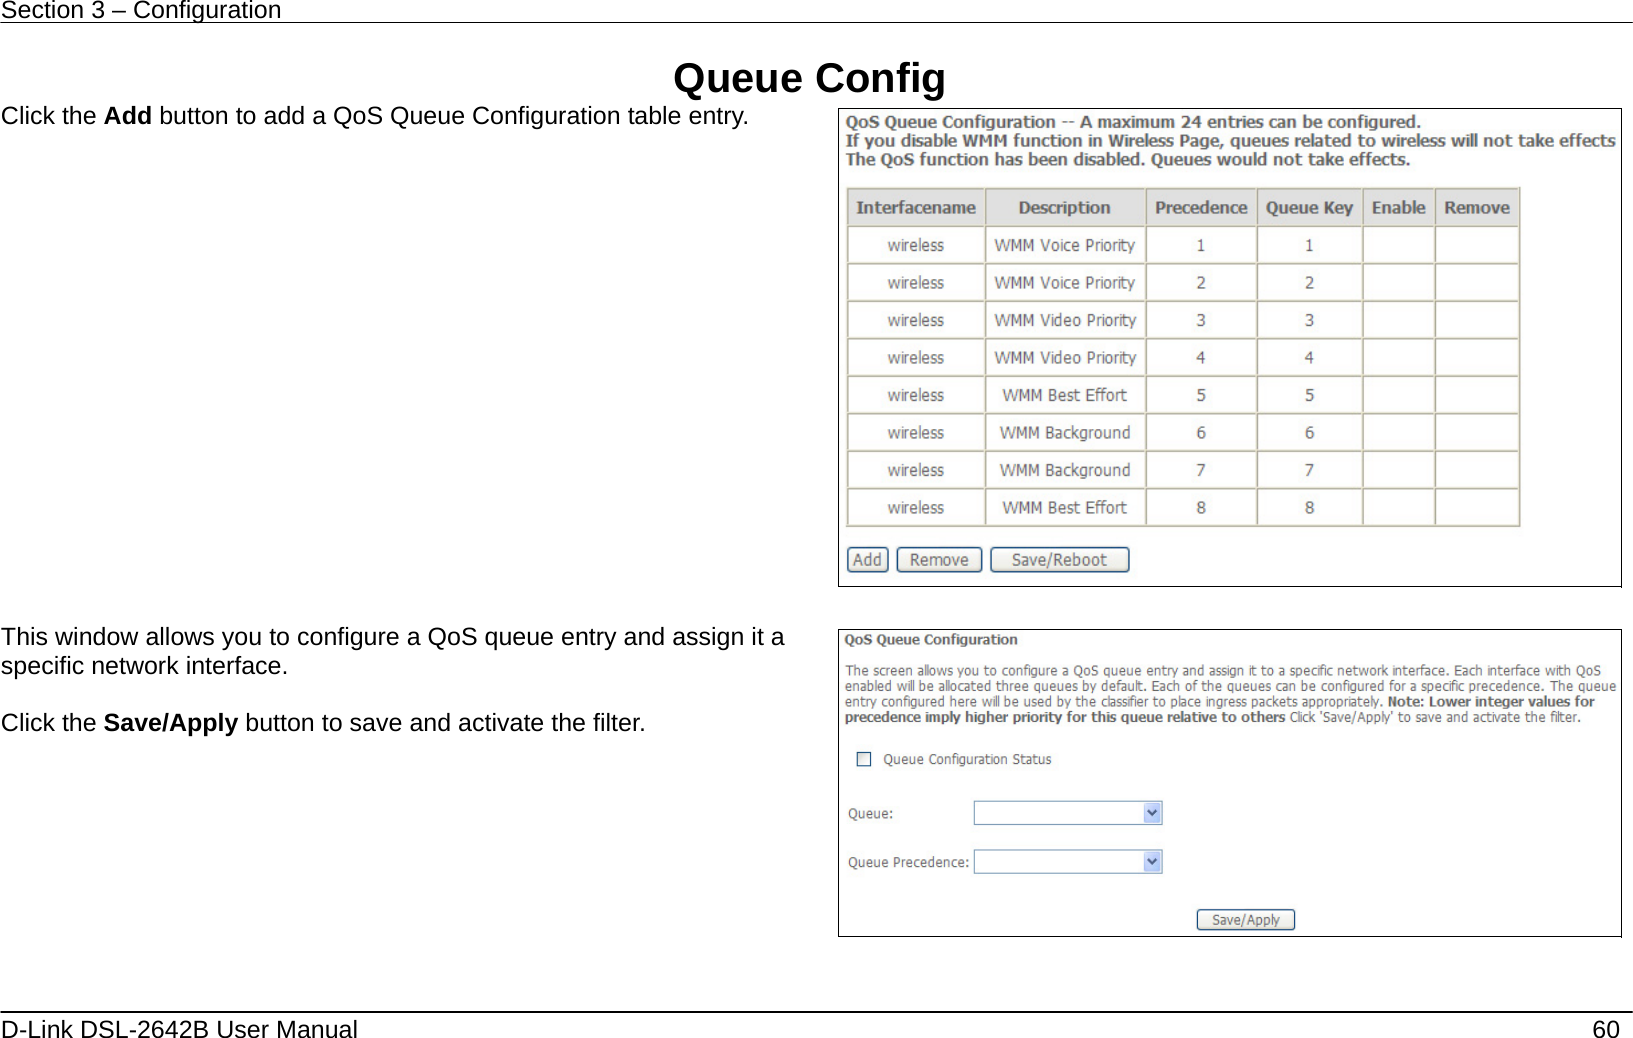 Section 3 – Configuration   D-Link DSL-2642B User Manual    60 Queue Config Click the Add button to add a QoS Queue Configuration table entry.     This window allows you to configure a QoS queue entry and assign it a specific network interface.   Click the Save/Apply button to save and activate the filter.    